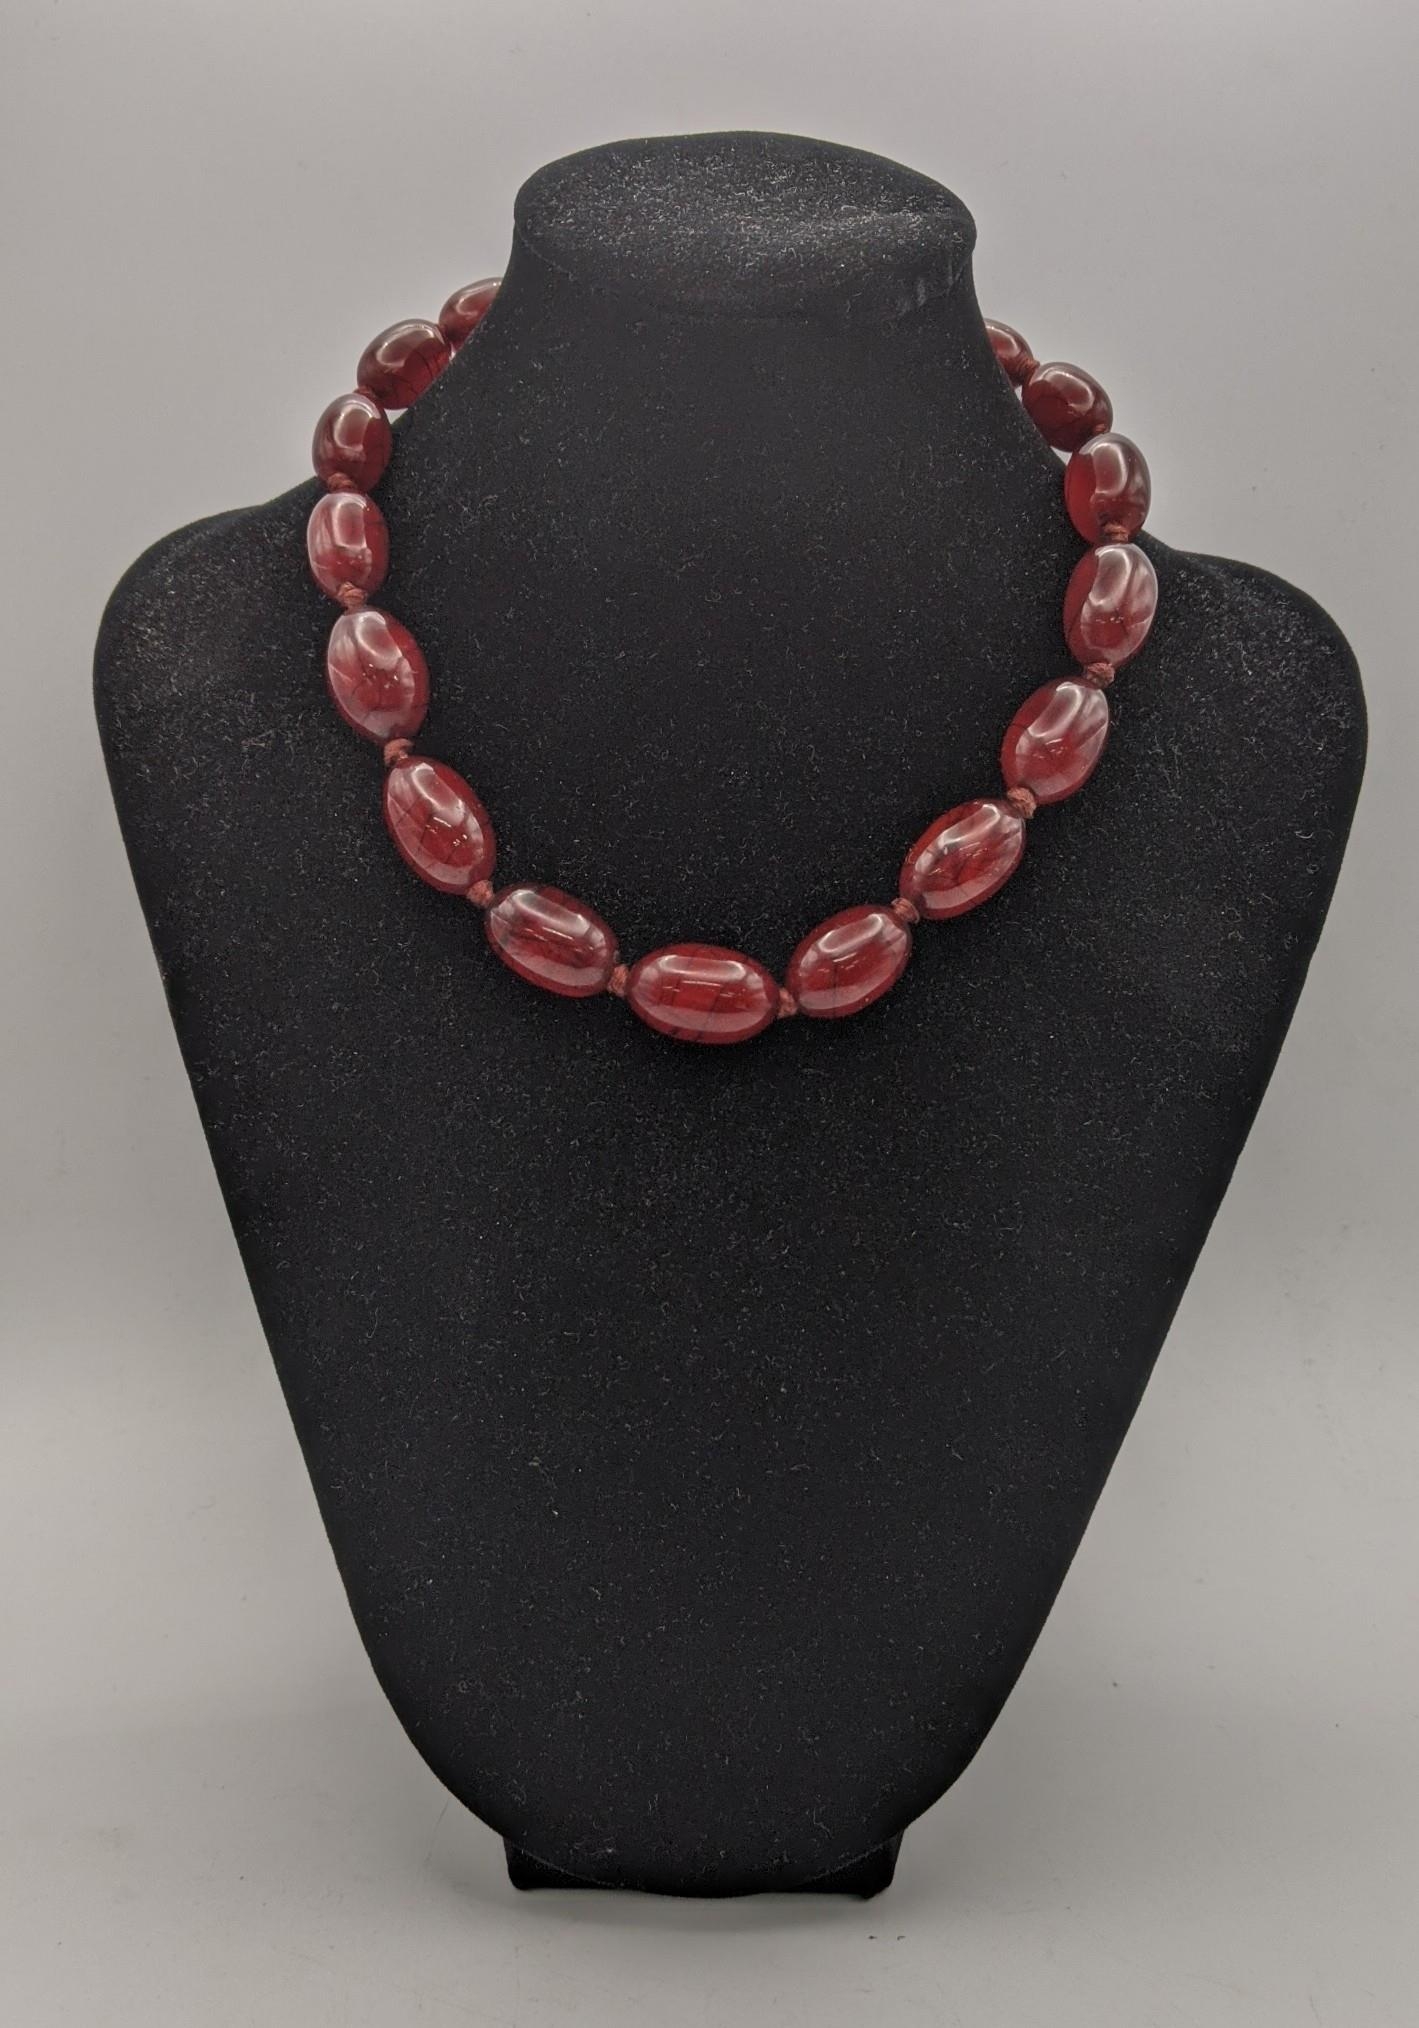 A Bakelite beaded necklace 36.7.g, Location: CAB 6